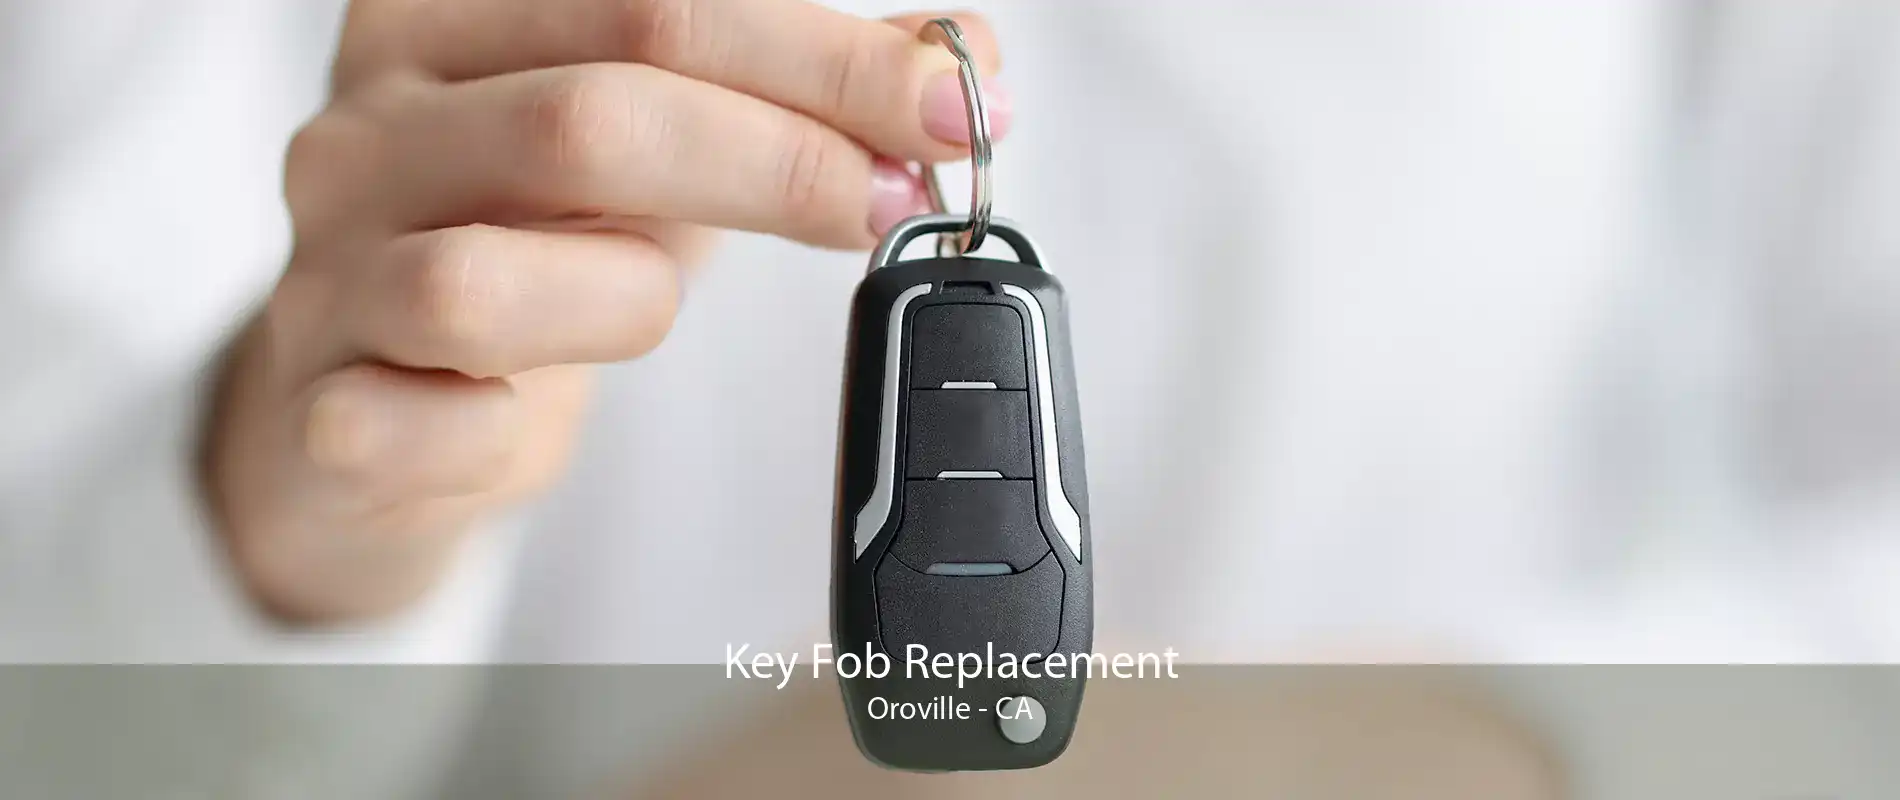 Key Fob Replacement Oroville - CA